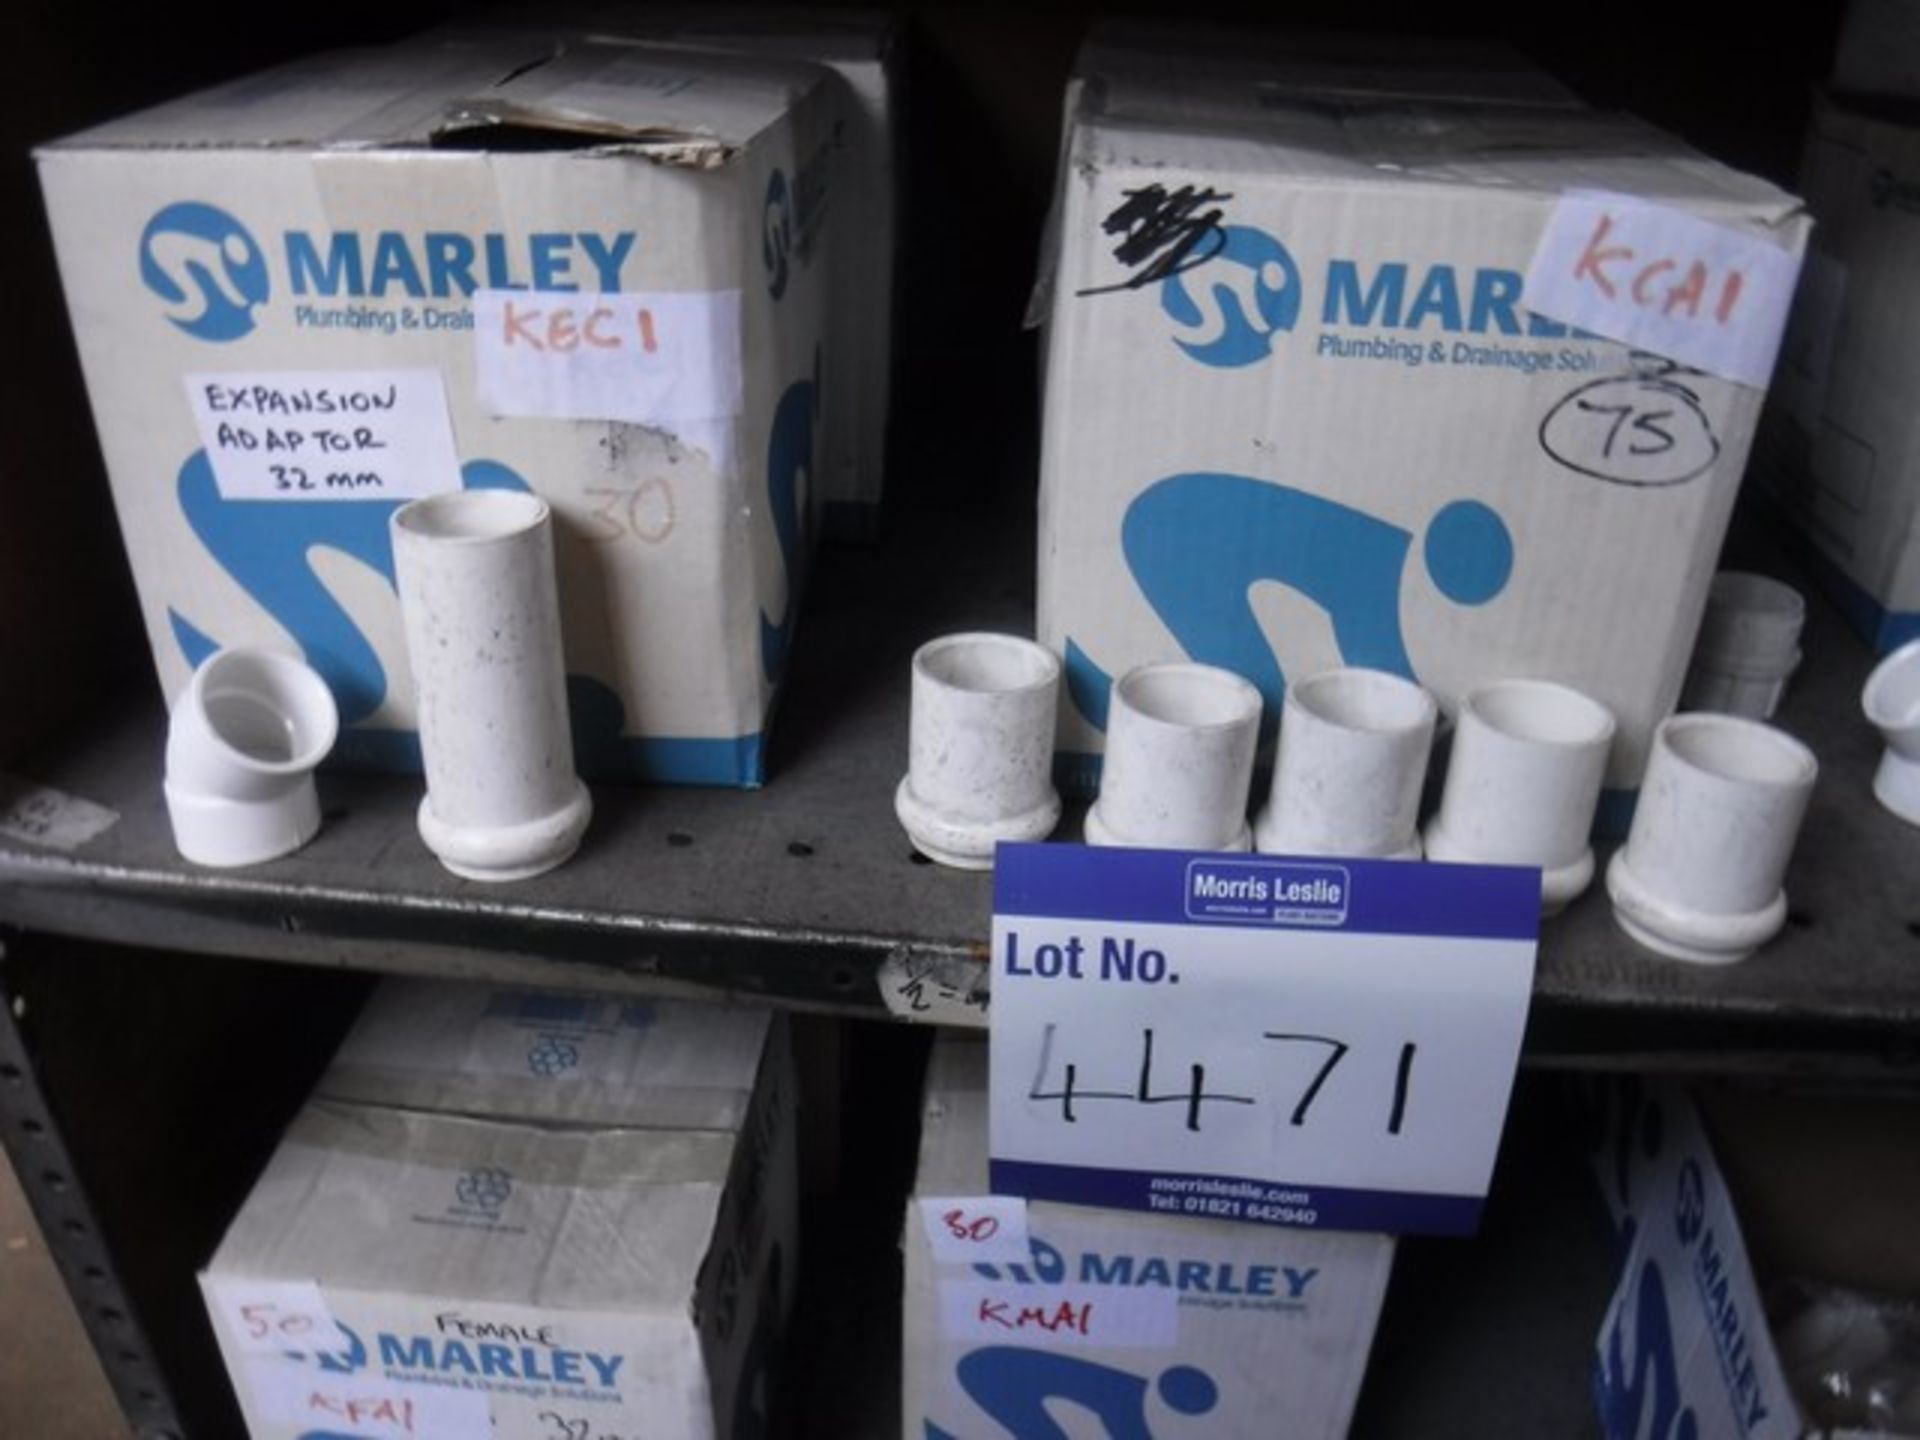 MARLEY MUPVC FITTINGS 32MM - Image 2 of 2